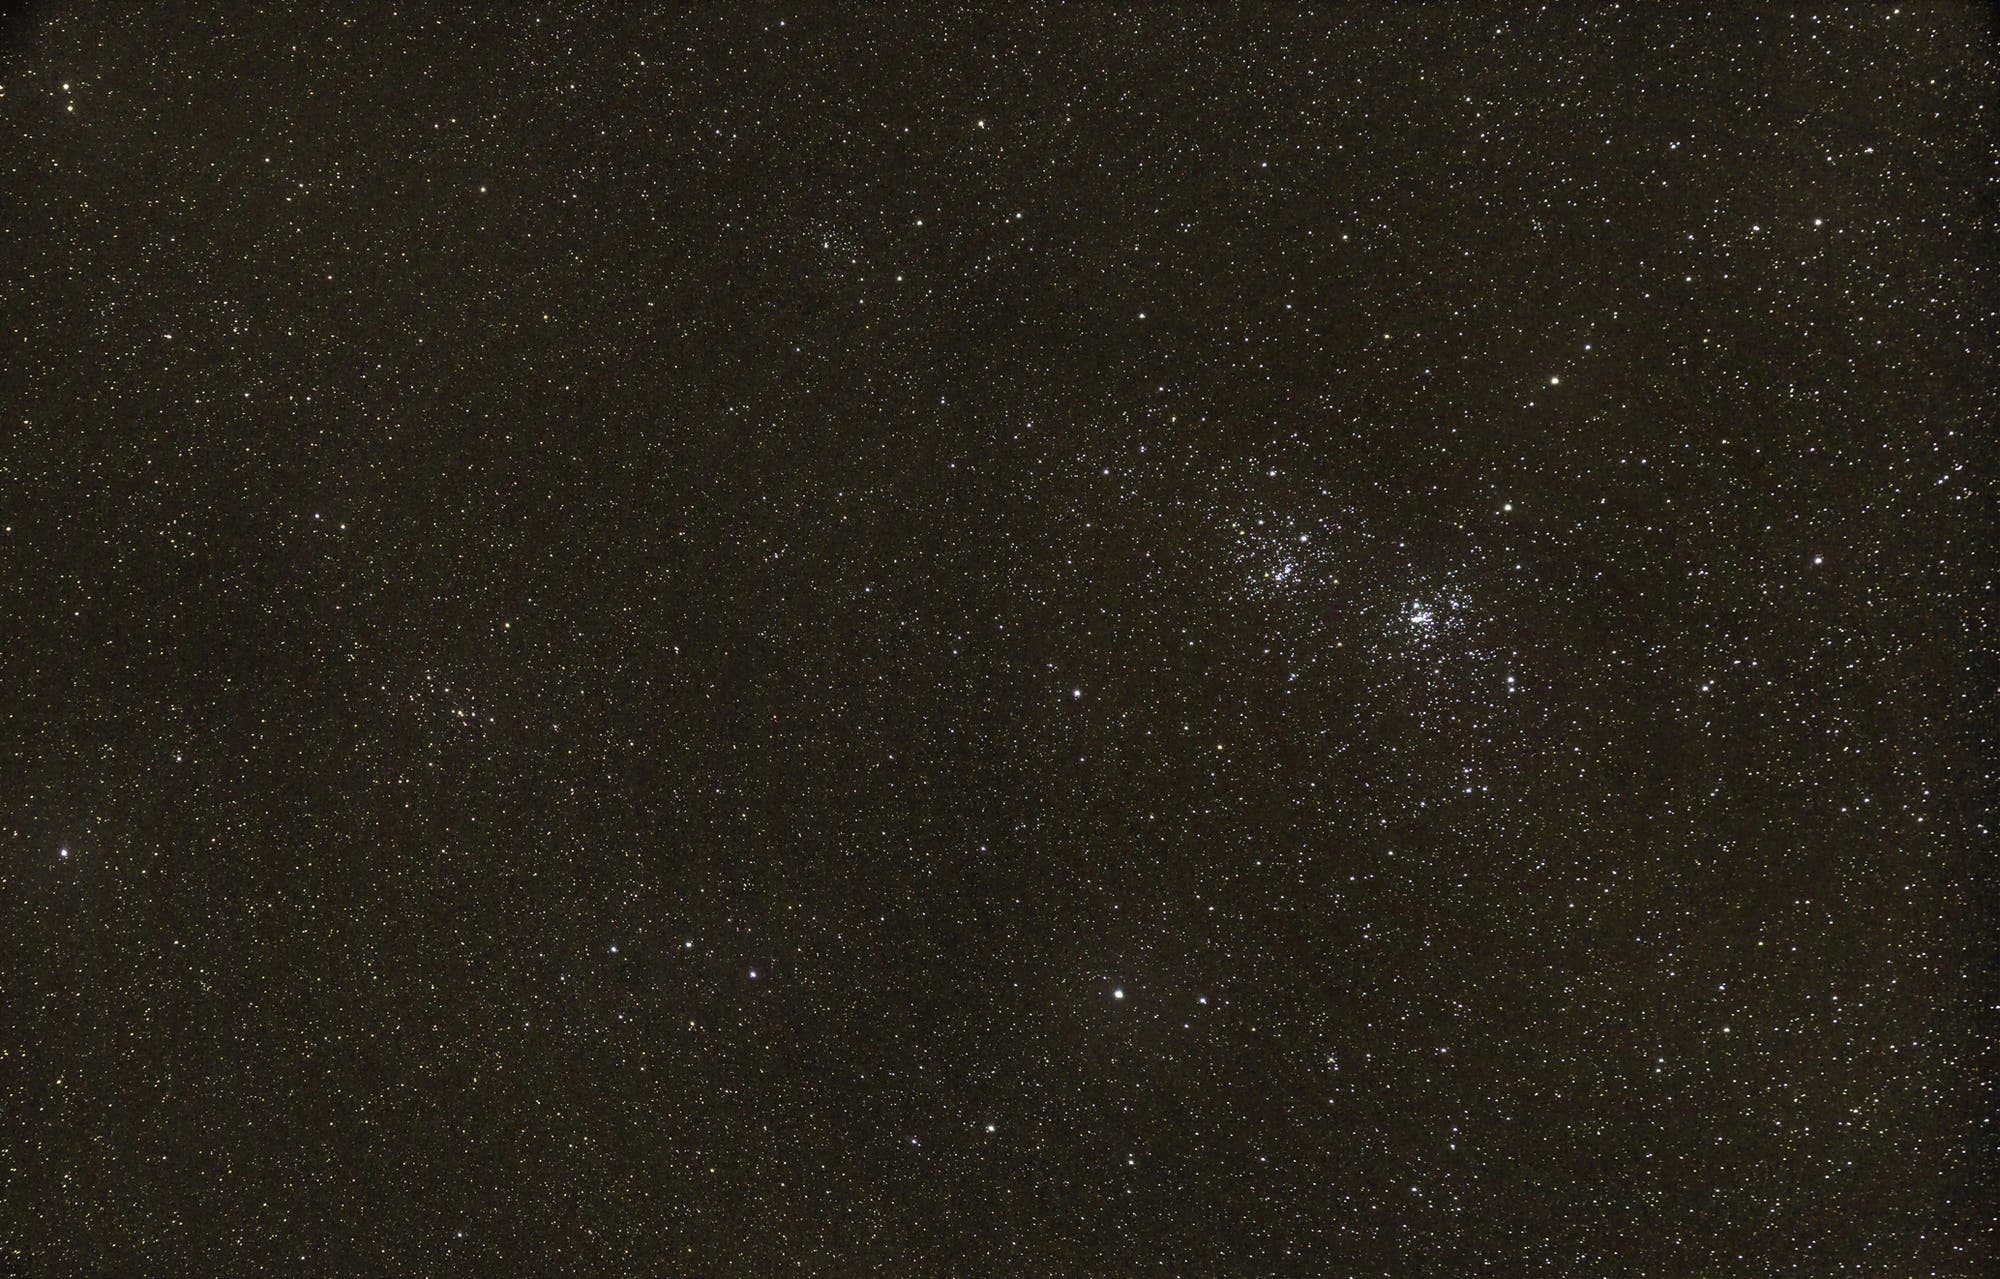 h & chi Persei, NGC 957